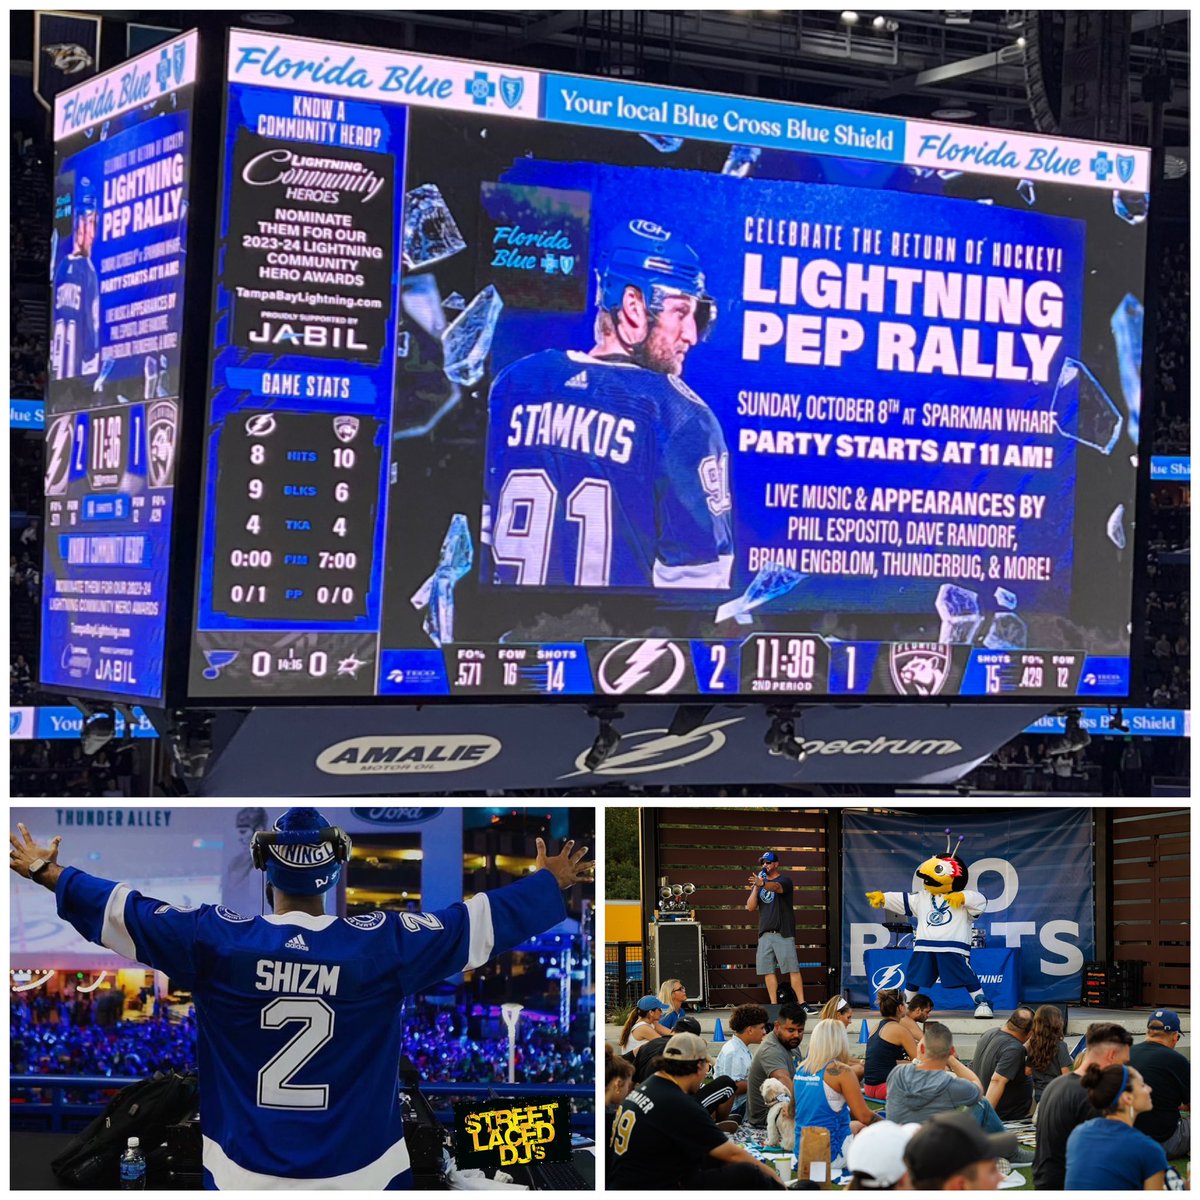 #BoltsNation⚡️Hope to see 🫵🏽 today at @sparkmanwharf for our OFFICIAL @TBLightning Pep Rally powered by @FLBlue! @StreetLacedDJs @DJShizm on vibes, I’ll be hosting alongside @ThunderBugTBL w/visits from @PhilEspo7, @DaveRandorf, @DaveMishkin, Brian Engblom, #BoltsBlueCrew & More!